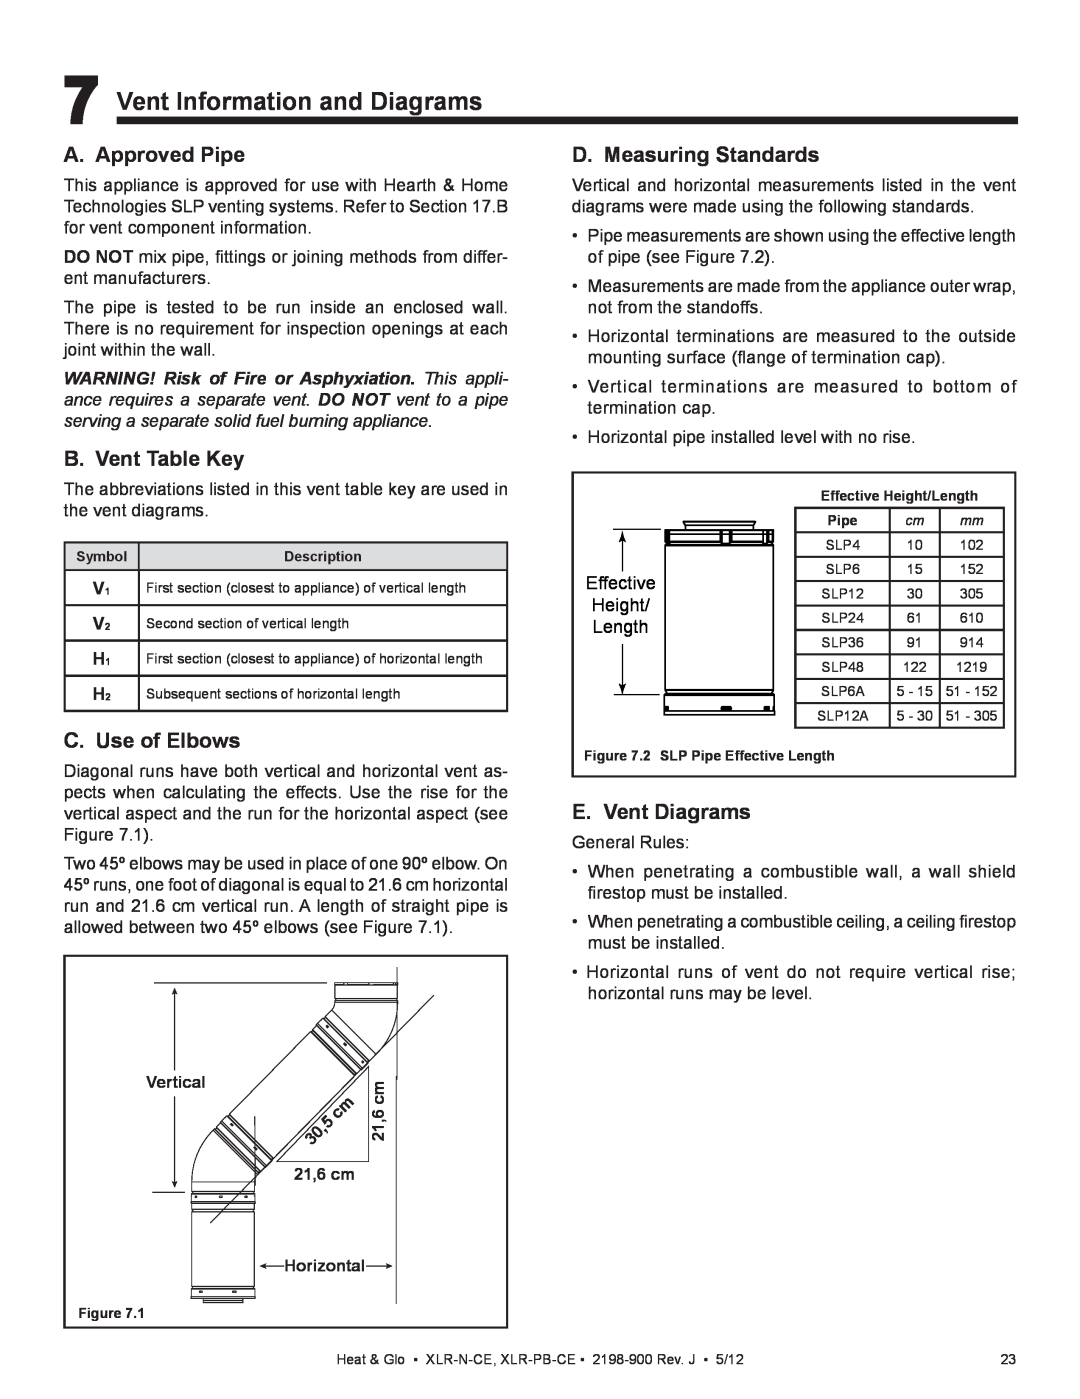 Heat & Glo LifeStyle XLR-PB-CE manual Vent Information and Diagrams, A. Approved Pipe, B. Vent Table Key, C. Use of Elbows 